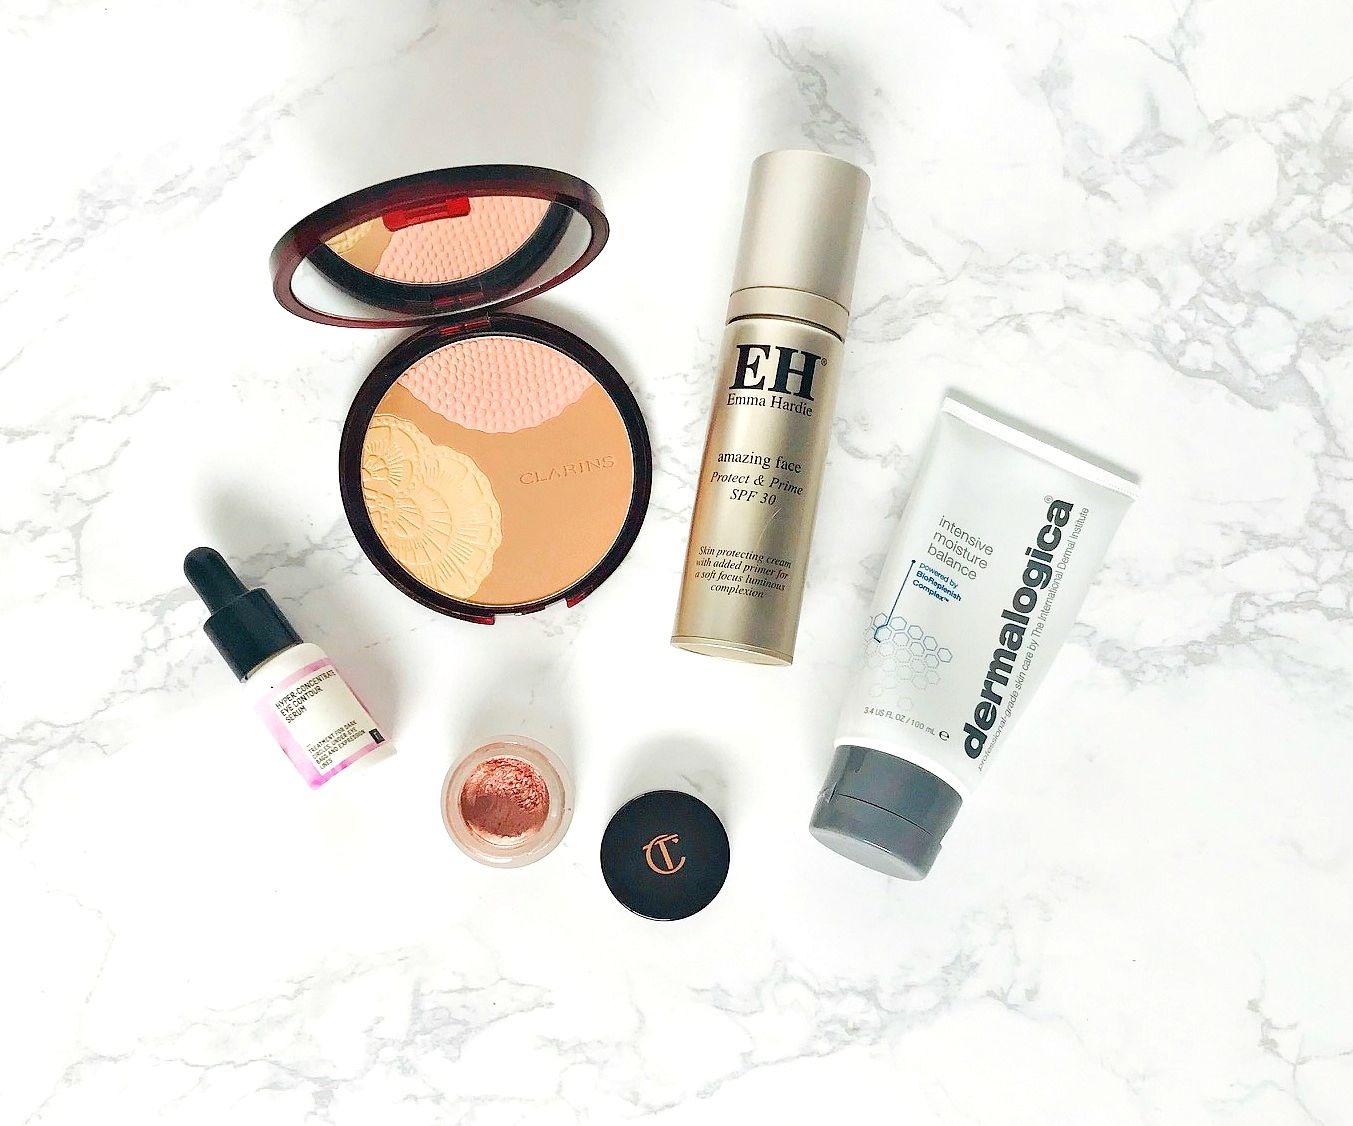 Dermalogica Intensive  Moisture Balance, Charlotte Tilbury Eyes to Mesmerise, Emma Hardie Amazing Face protect & Prime, Freshly Cosmetics Hyper Concentrate Eye Contour Serum, Clarins Bronzing Compact 001 Sunset Glow